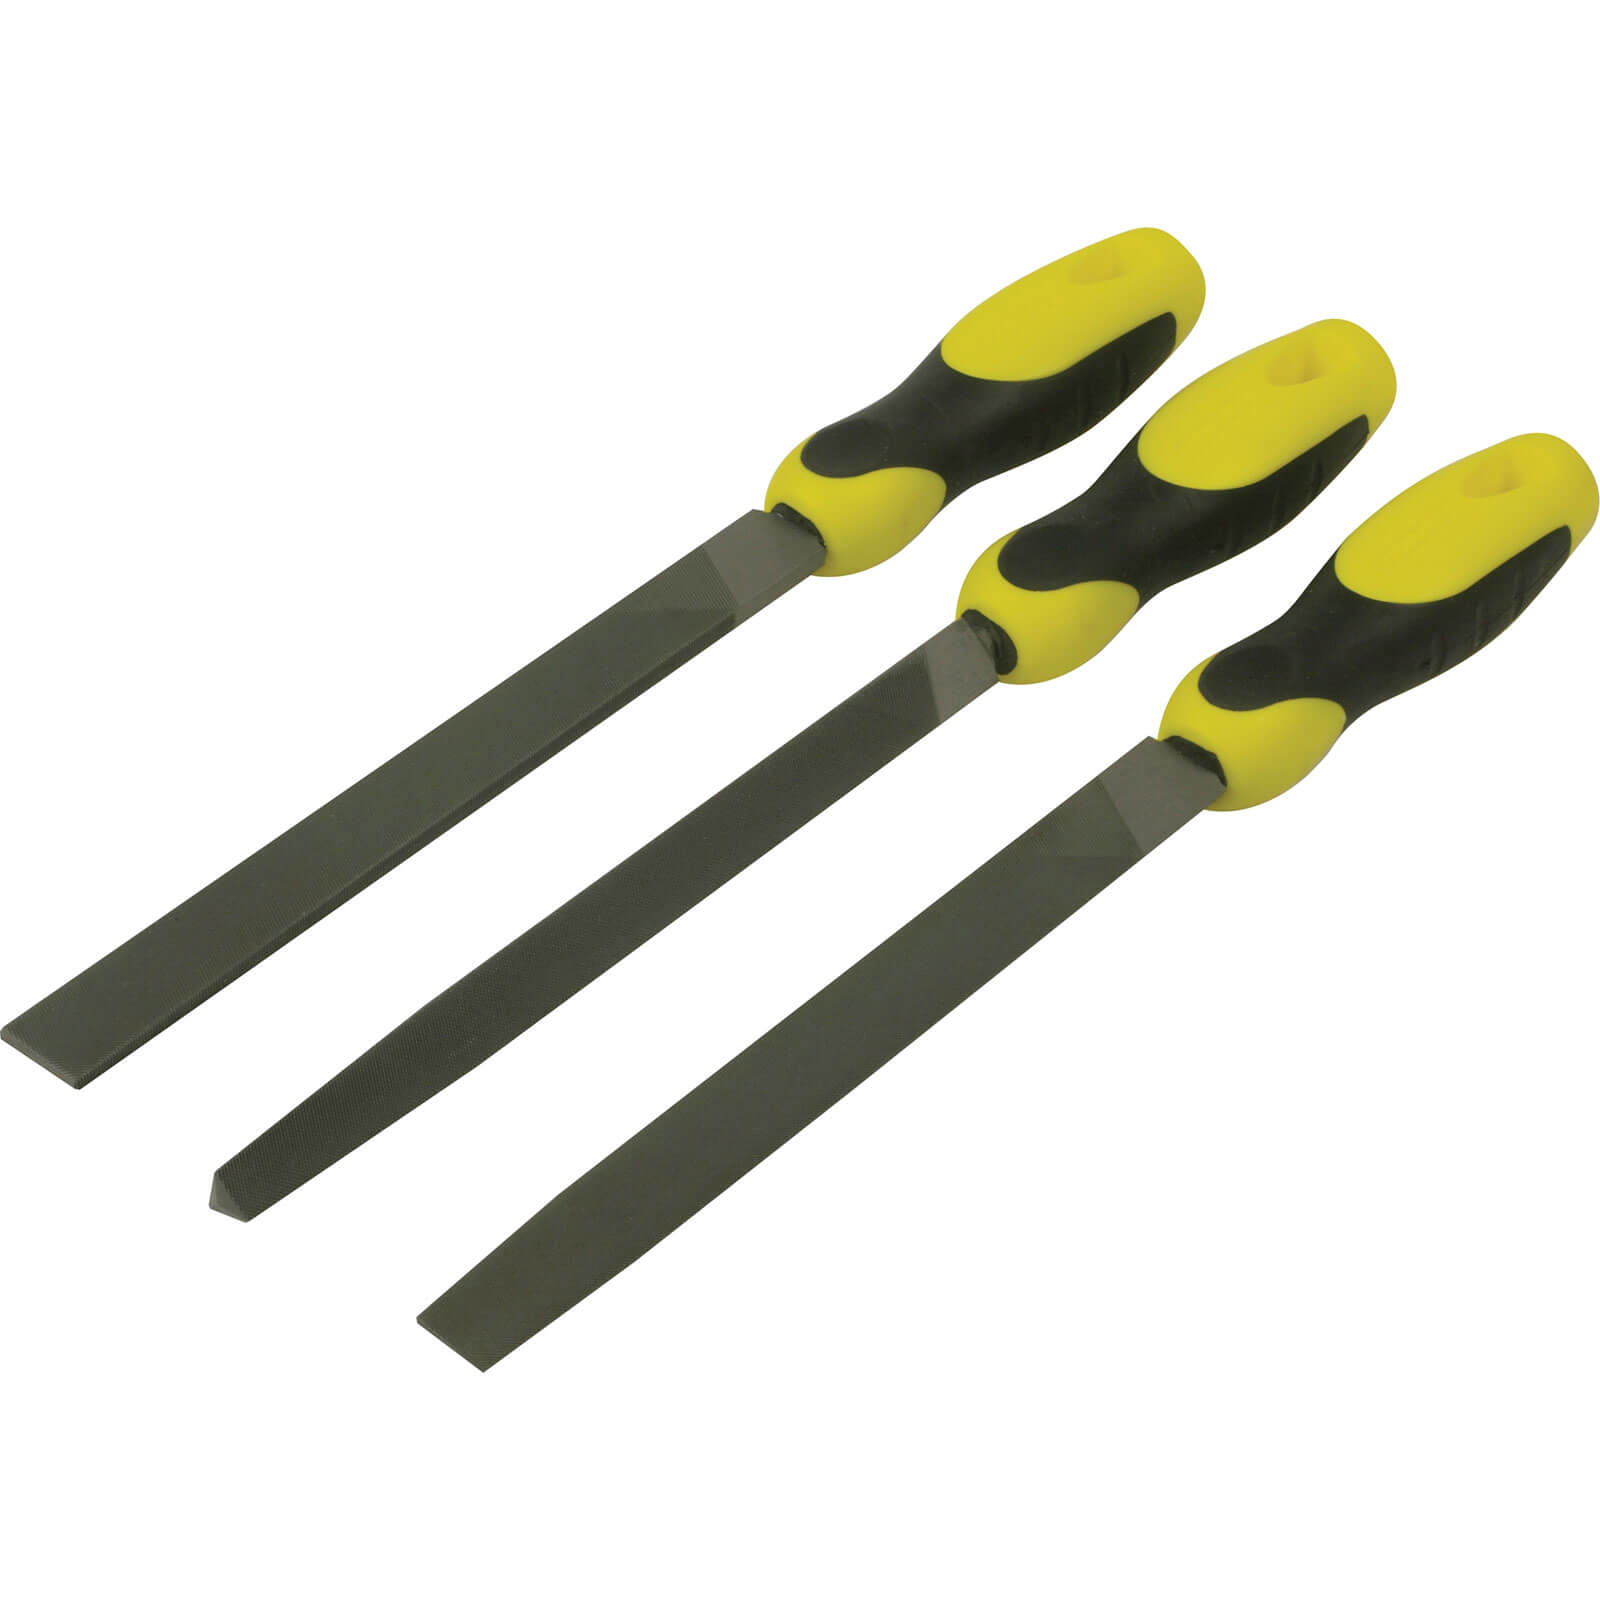 Image of Stanley 3 Piece File Set 8" / 200mm